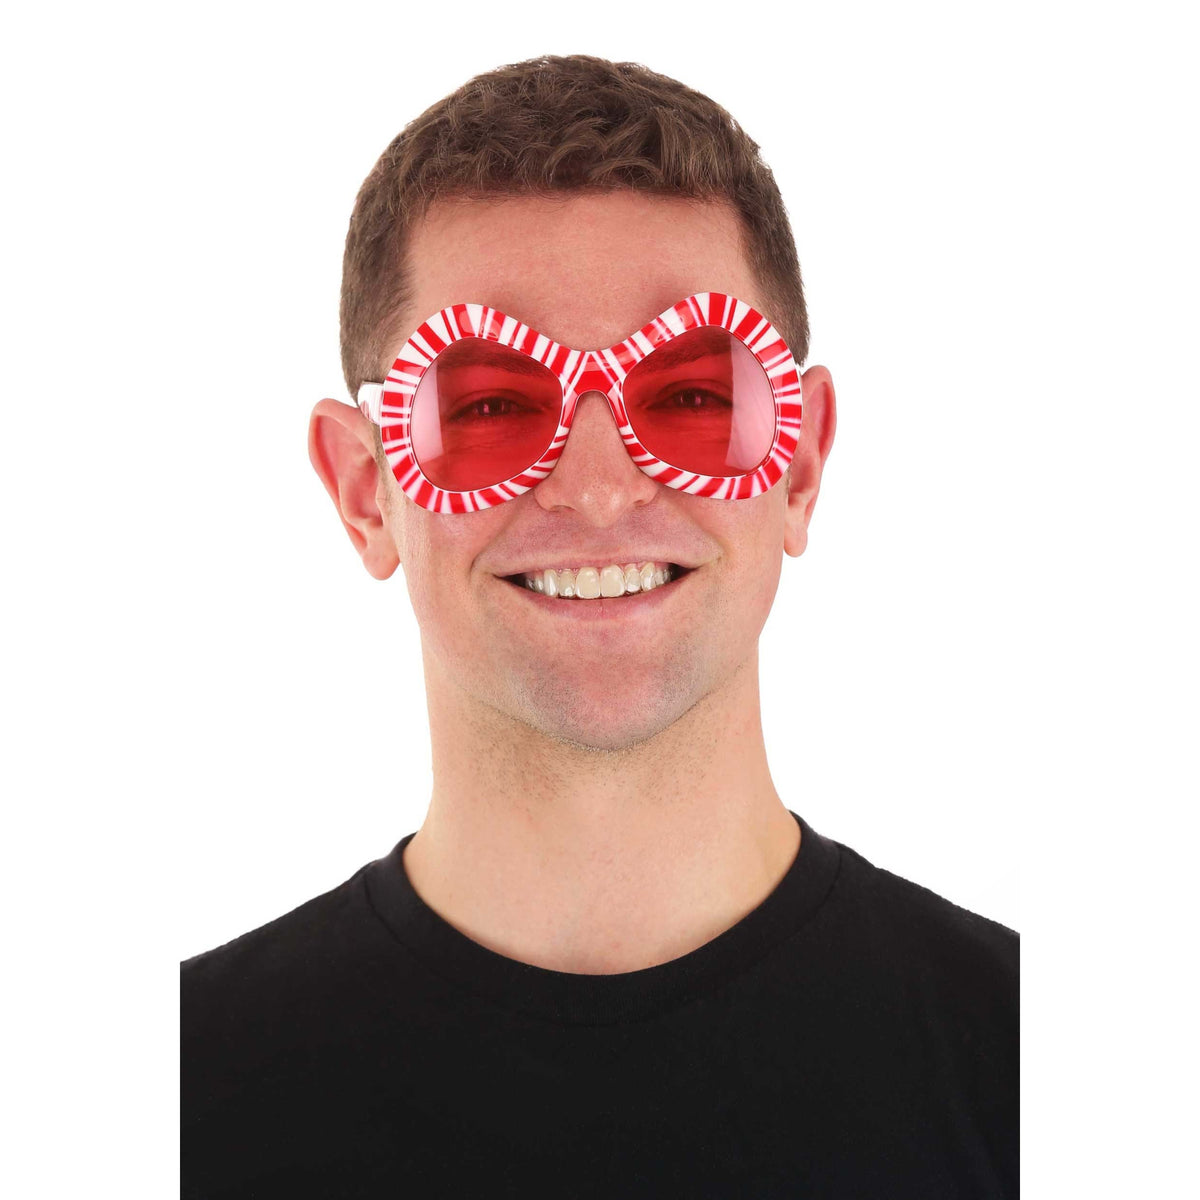 Front view of a man wearing the Mod Candy Cane glasses against a white background.